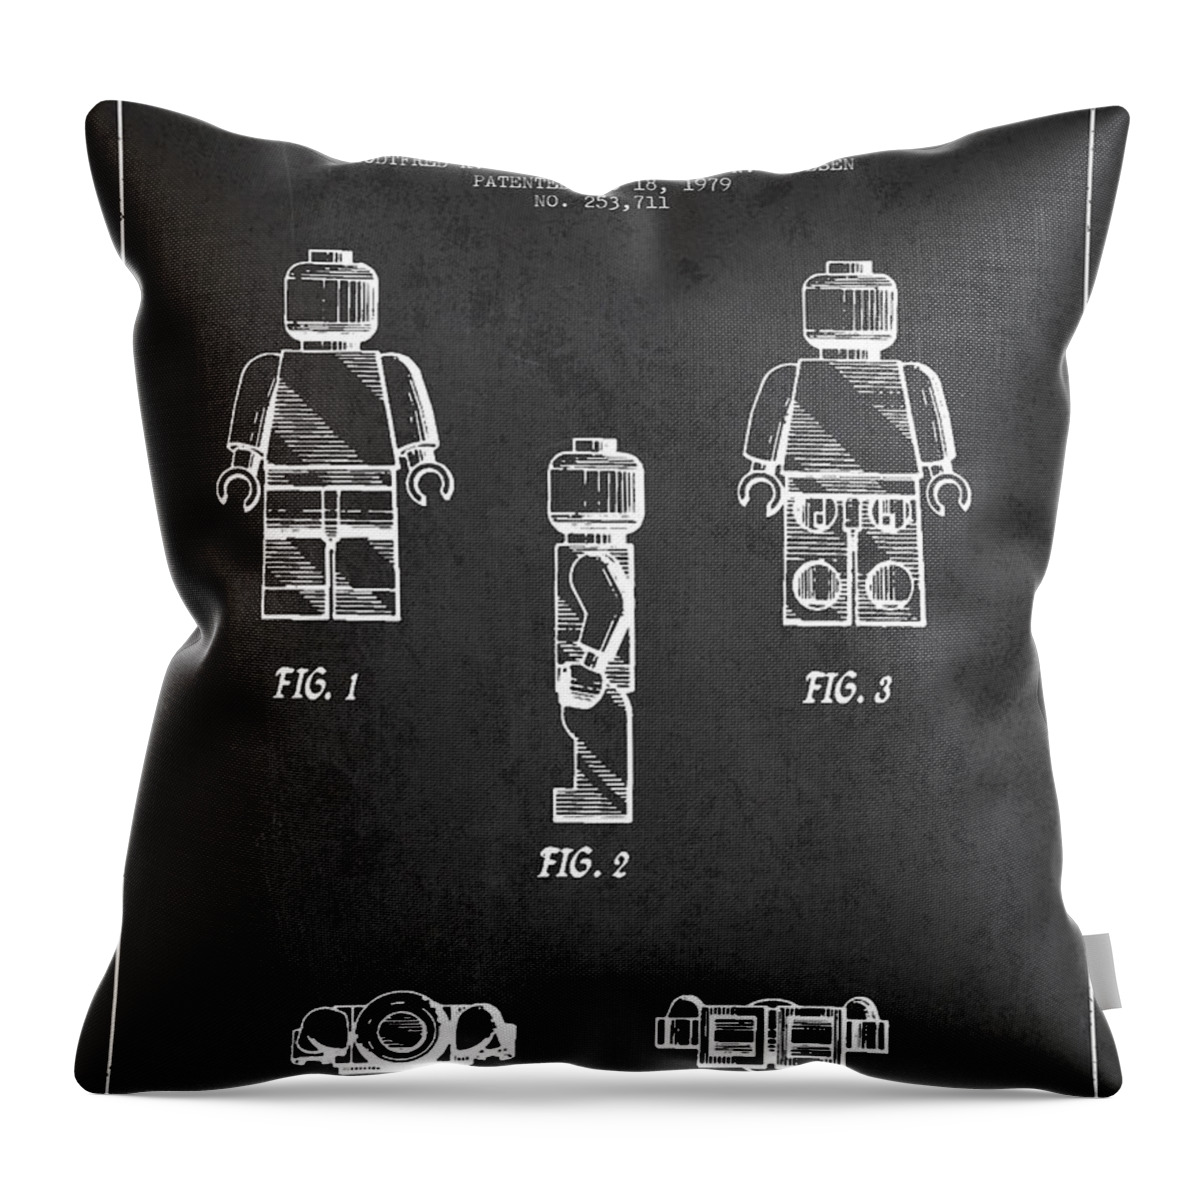 Lego Throw Pillow featuring the digital art Lego Toy Figure Patent - Dark #2 by Aged Pixel